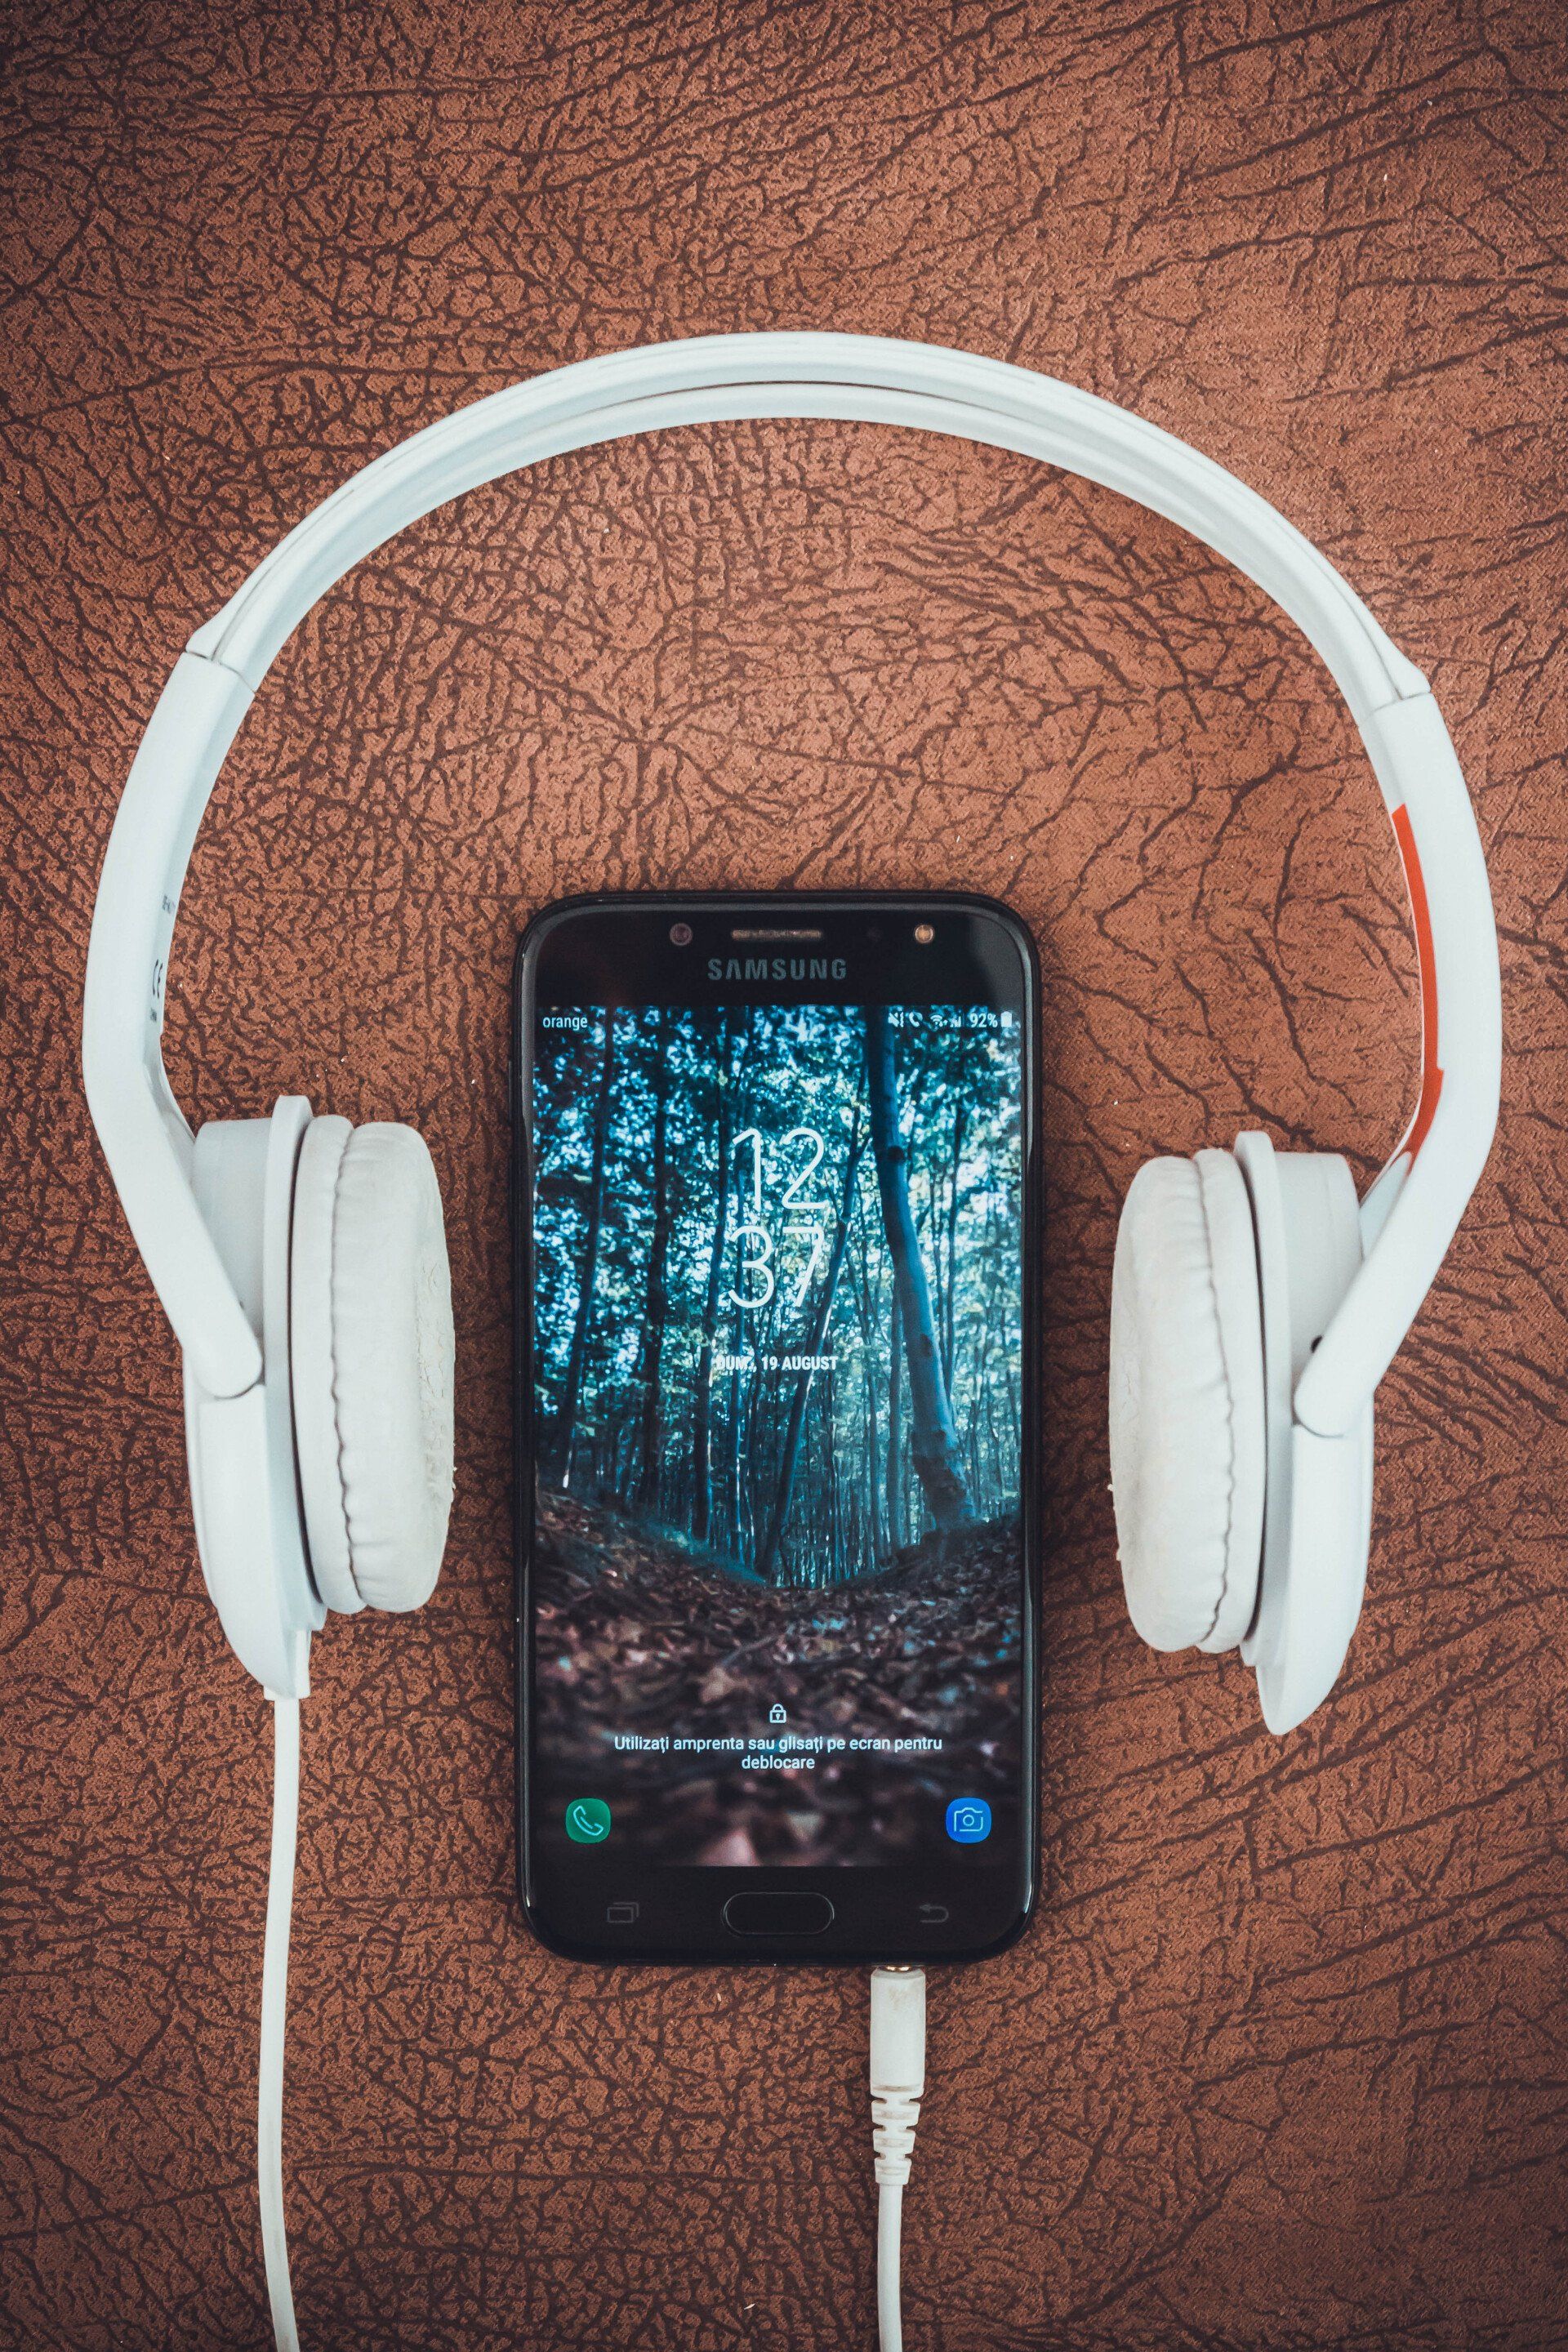 headphones and phone to listen to bilateral music from streaming